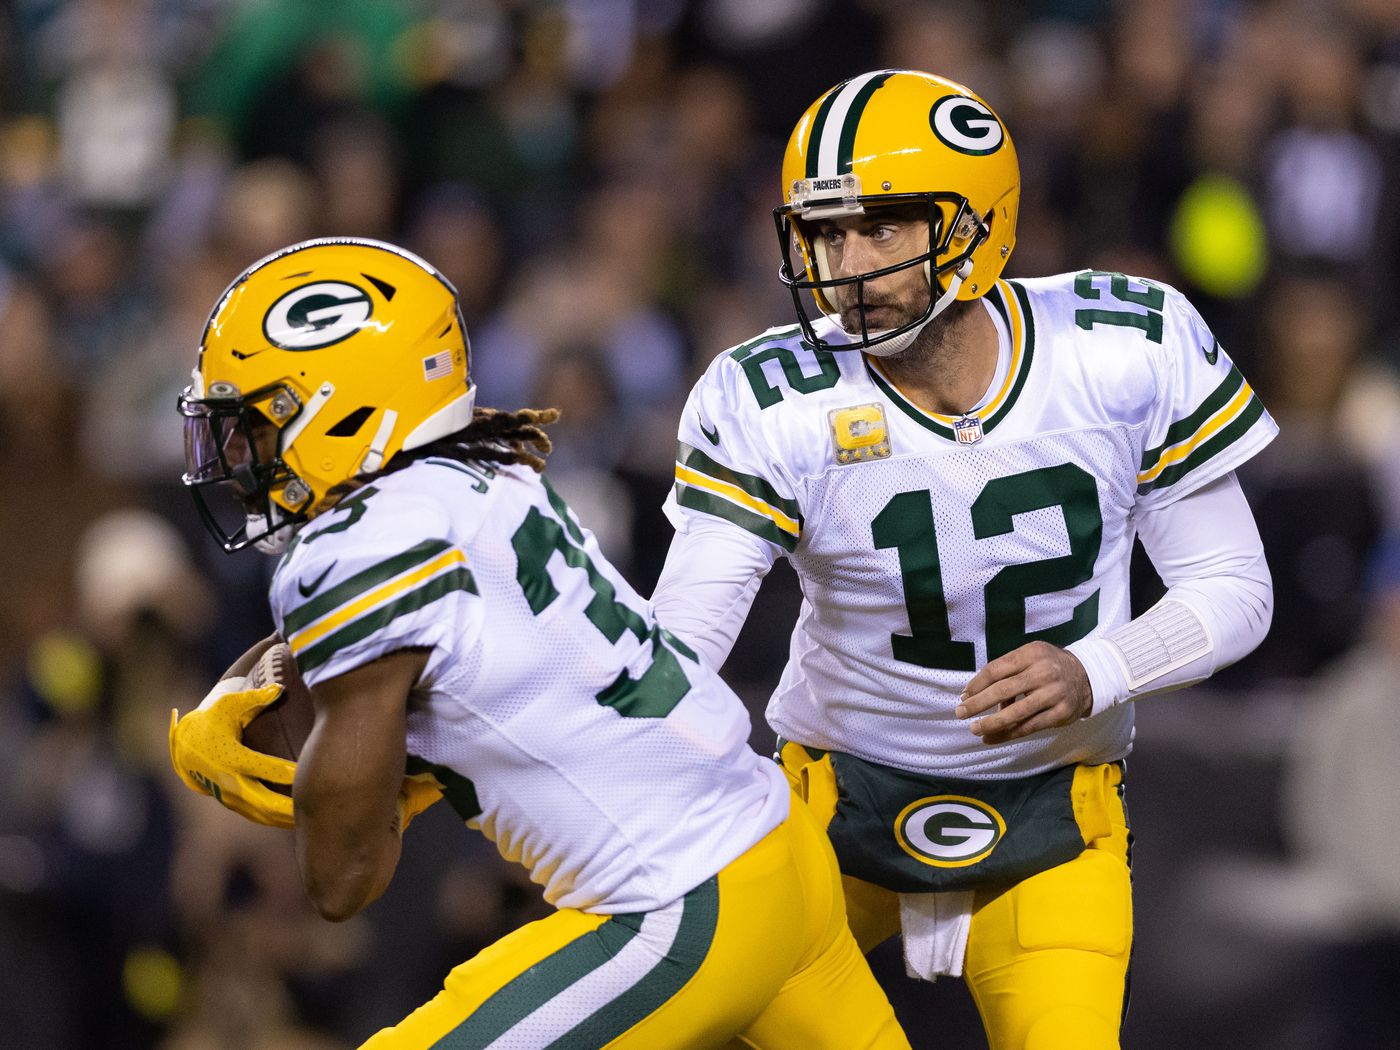 Rodgers plans to play for Jets in 2023, awaits Packers' move